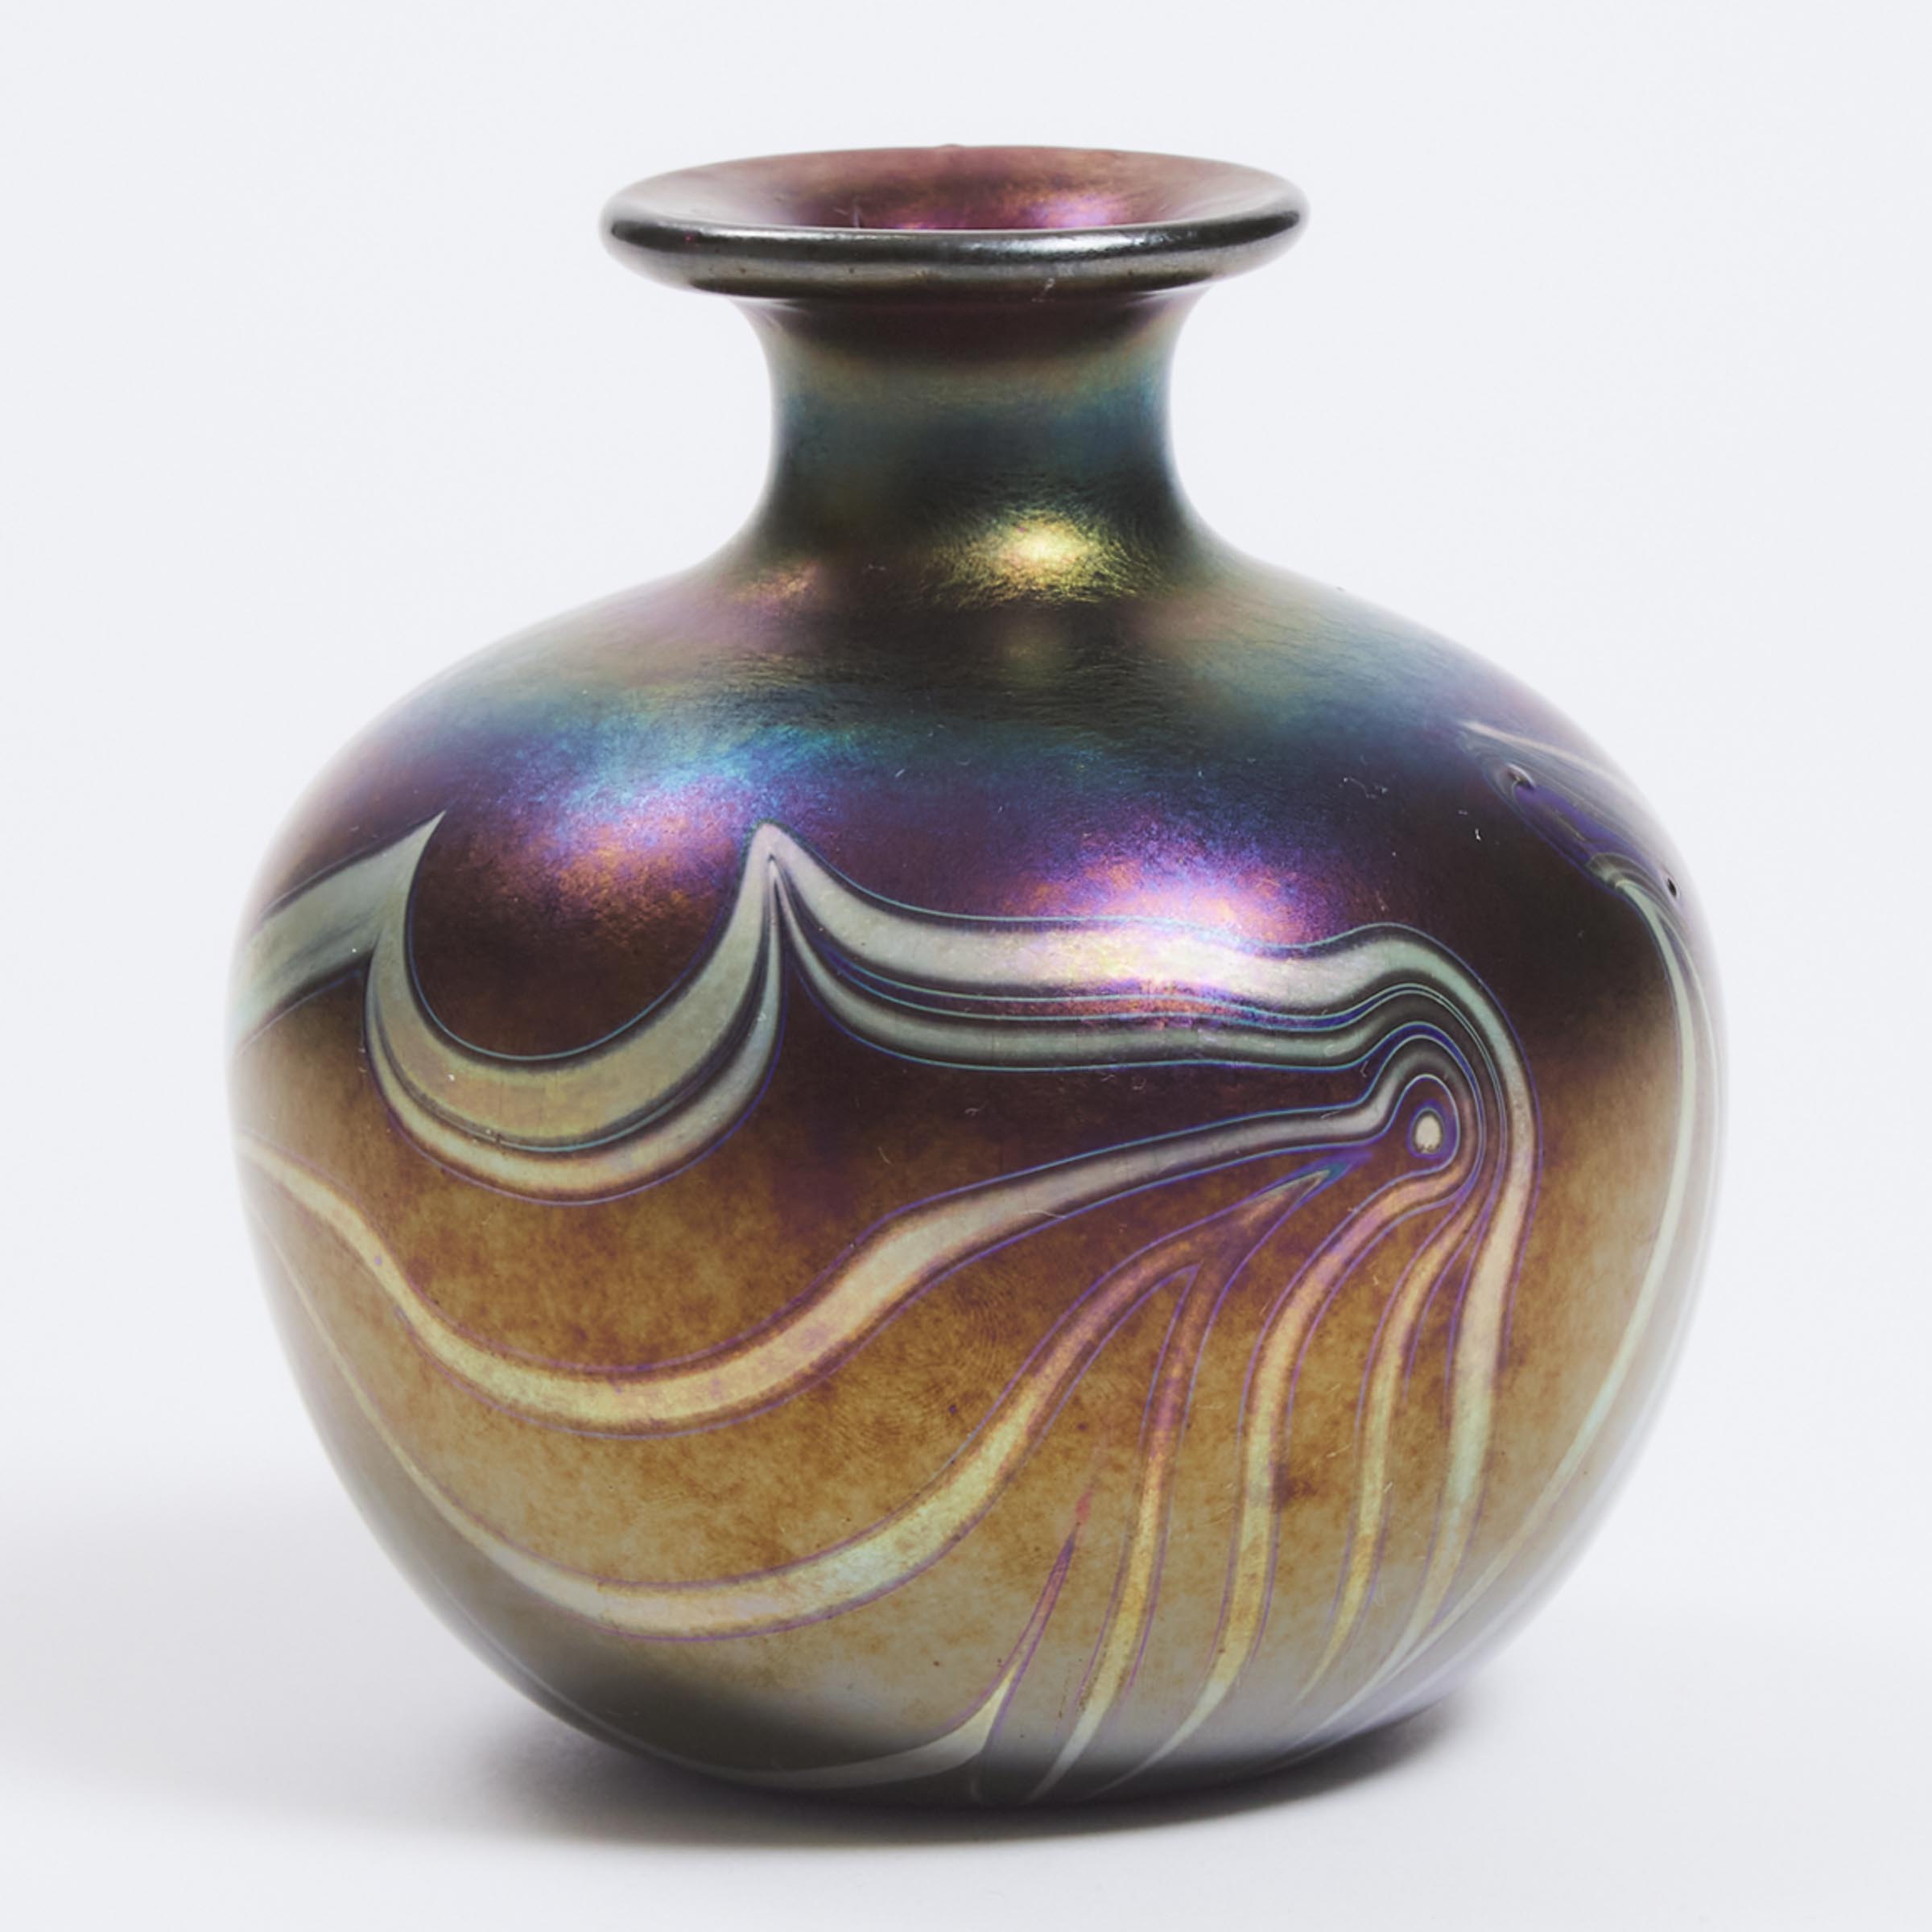 Charles Lotton (American, 1935-2021), 'Cypriot' Glass Vase, 1971